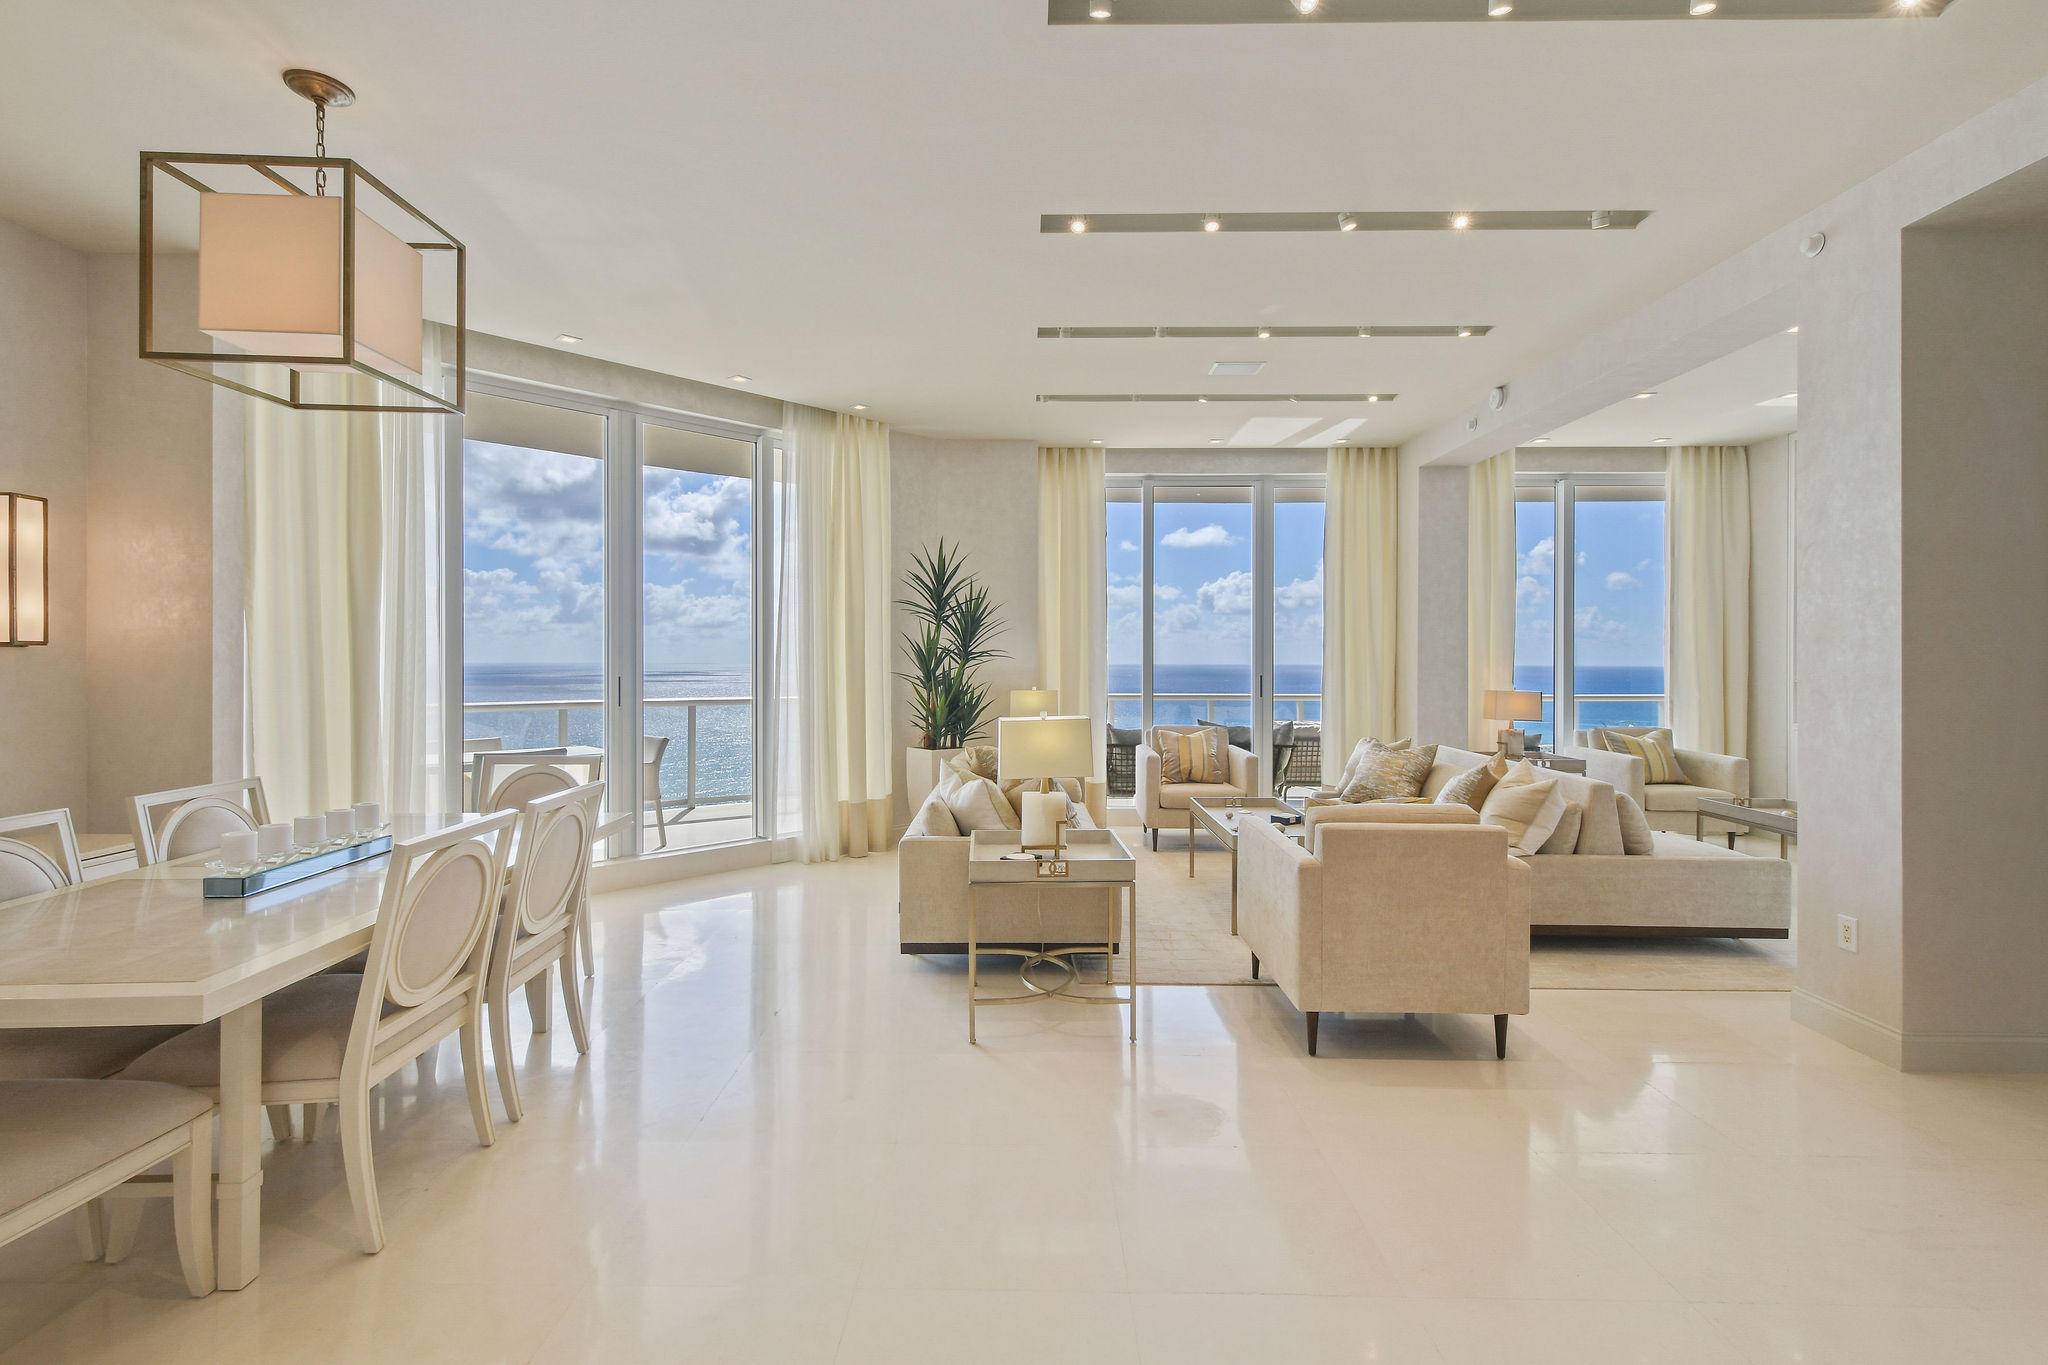 Penthouse condo featuring 10'4 volume ceilings, custom lighting ceiling details, and 9' wall to wall windows with dramatic views.